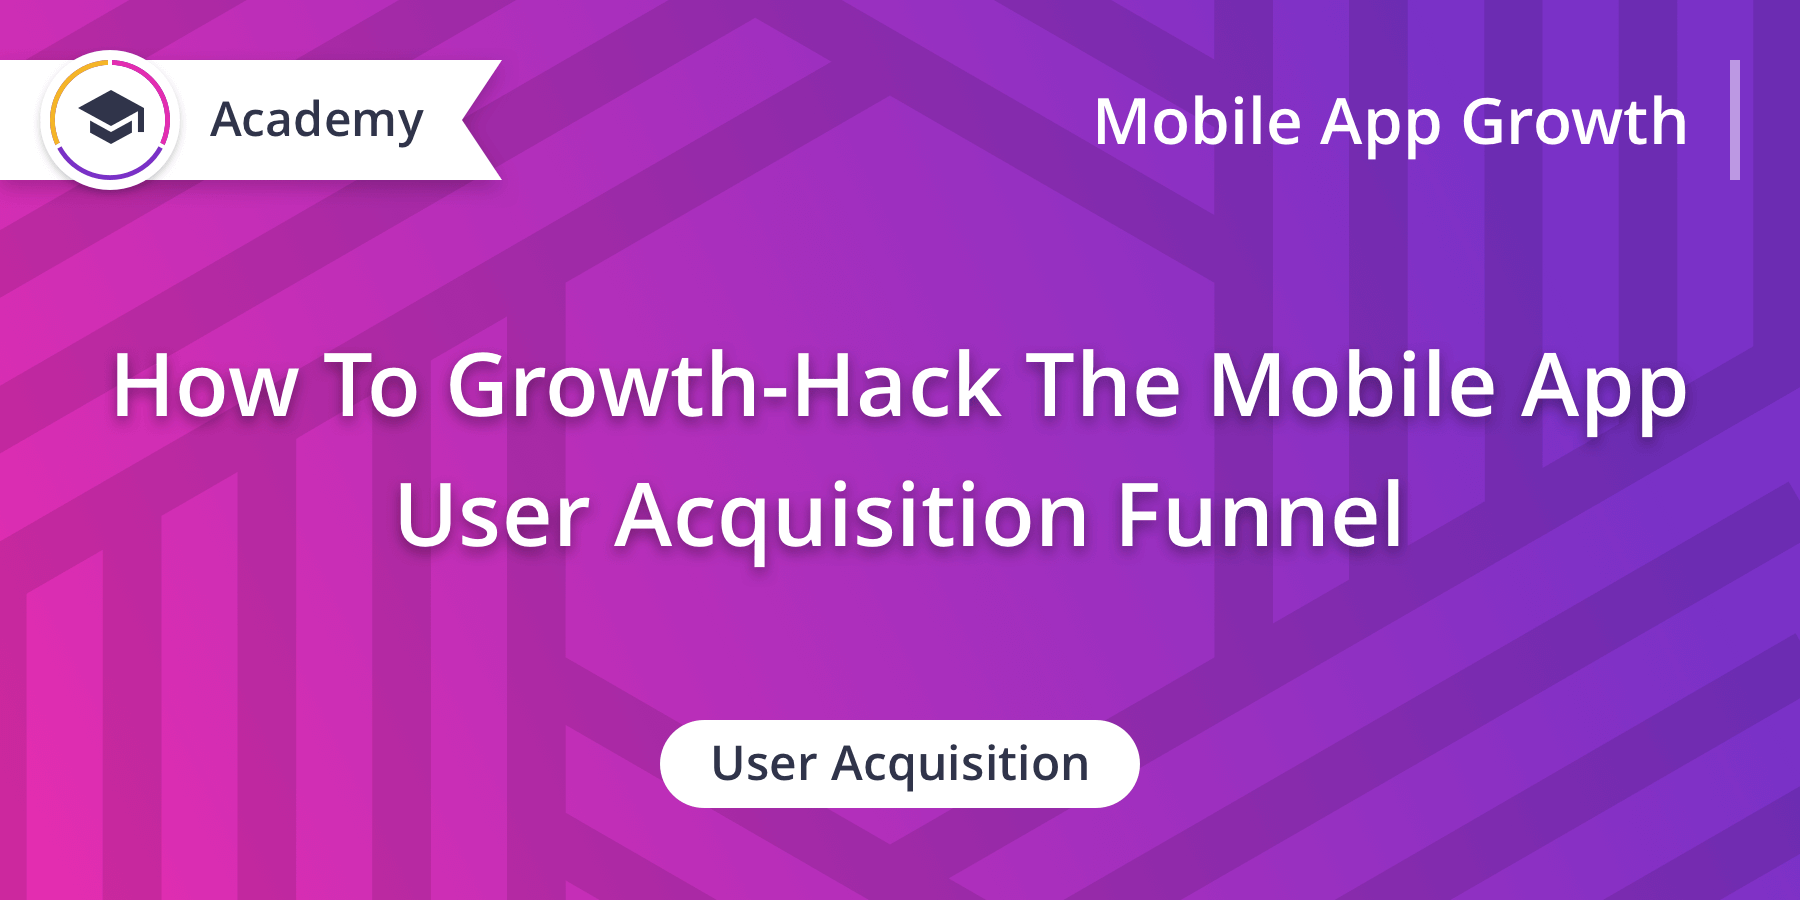 How To Growth-Hack The Mobile App User Acquisition Funnel